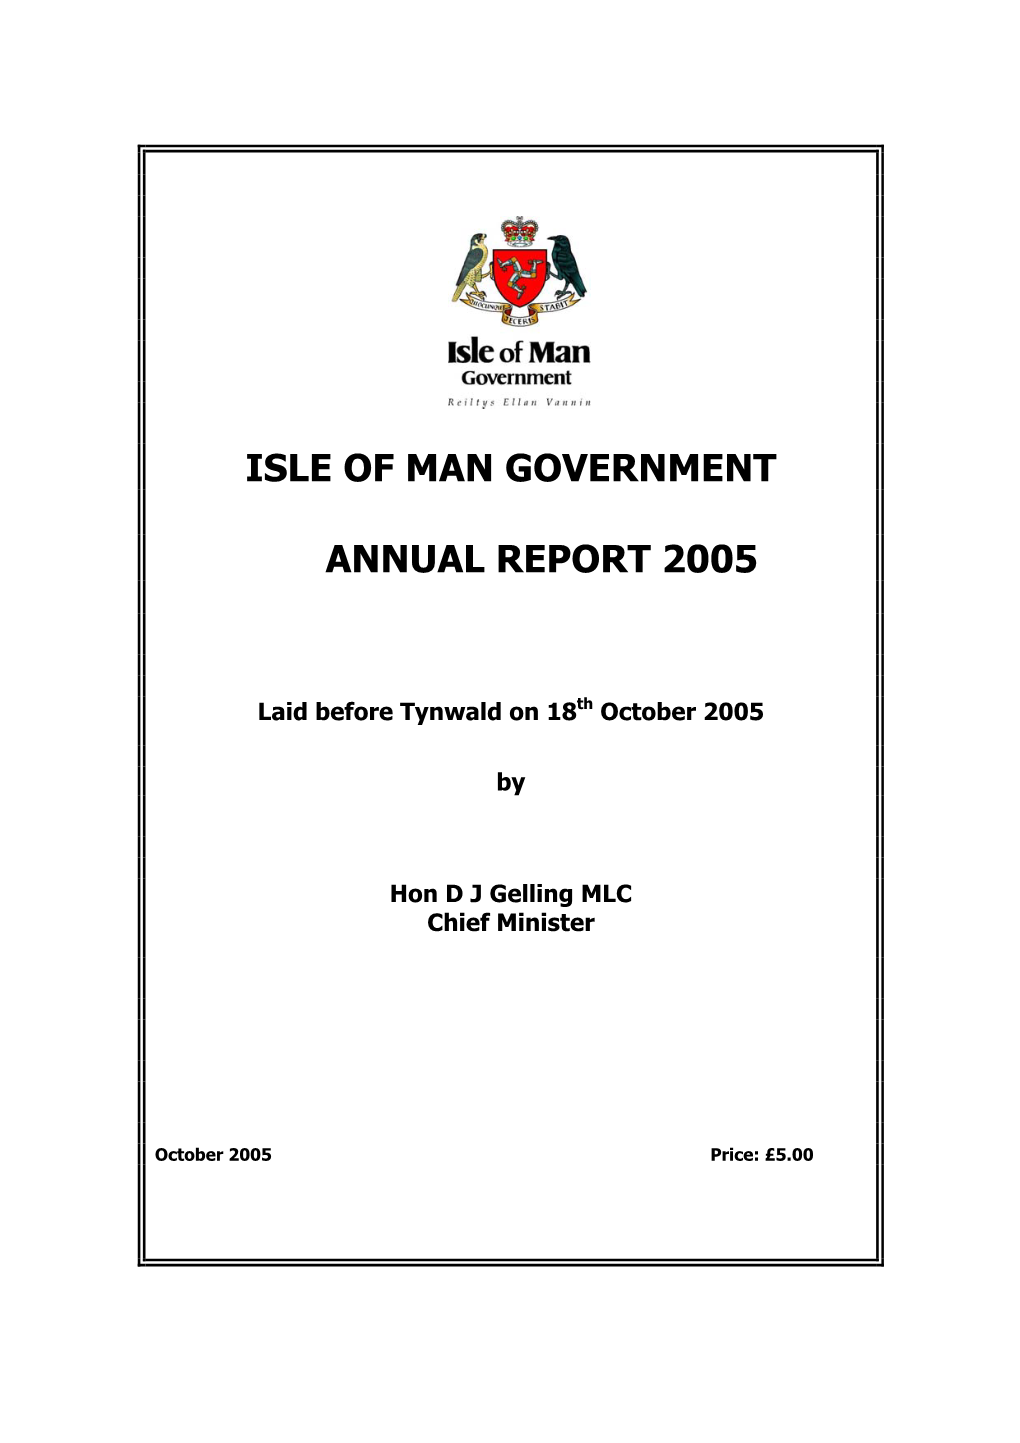 Isle of Man Government Annual Report 2005